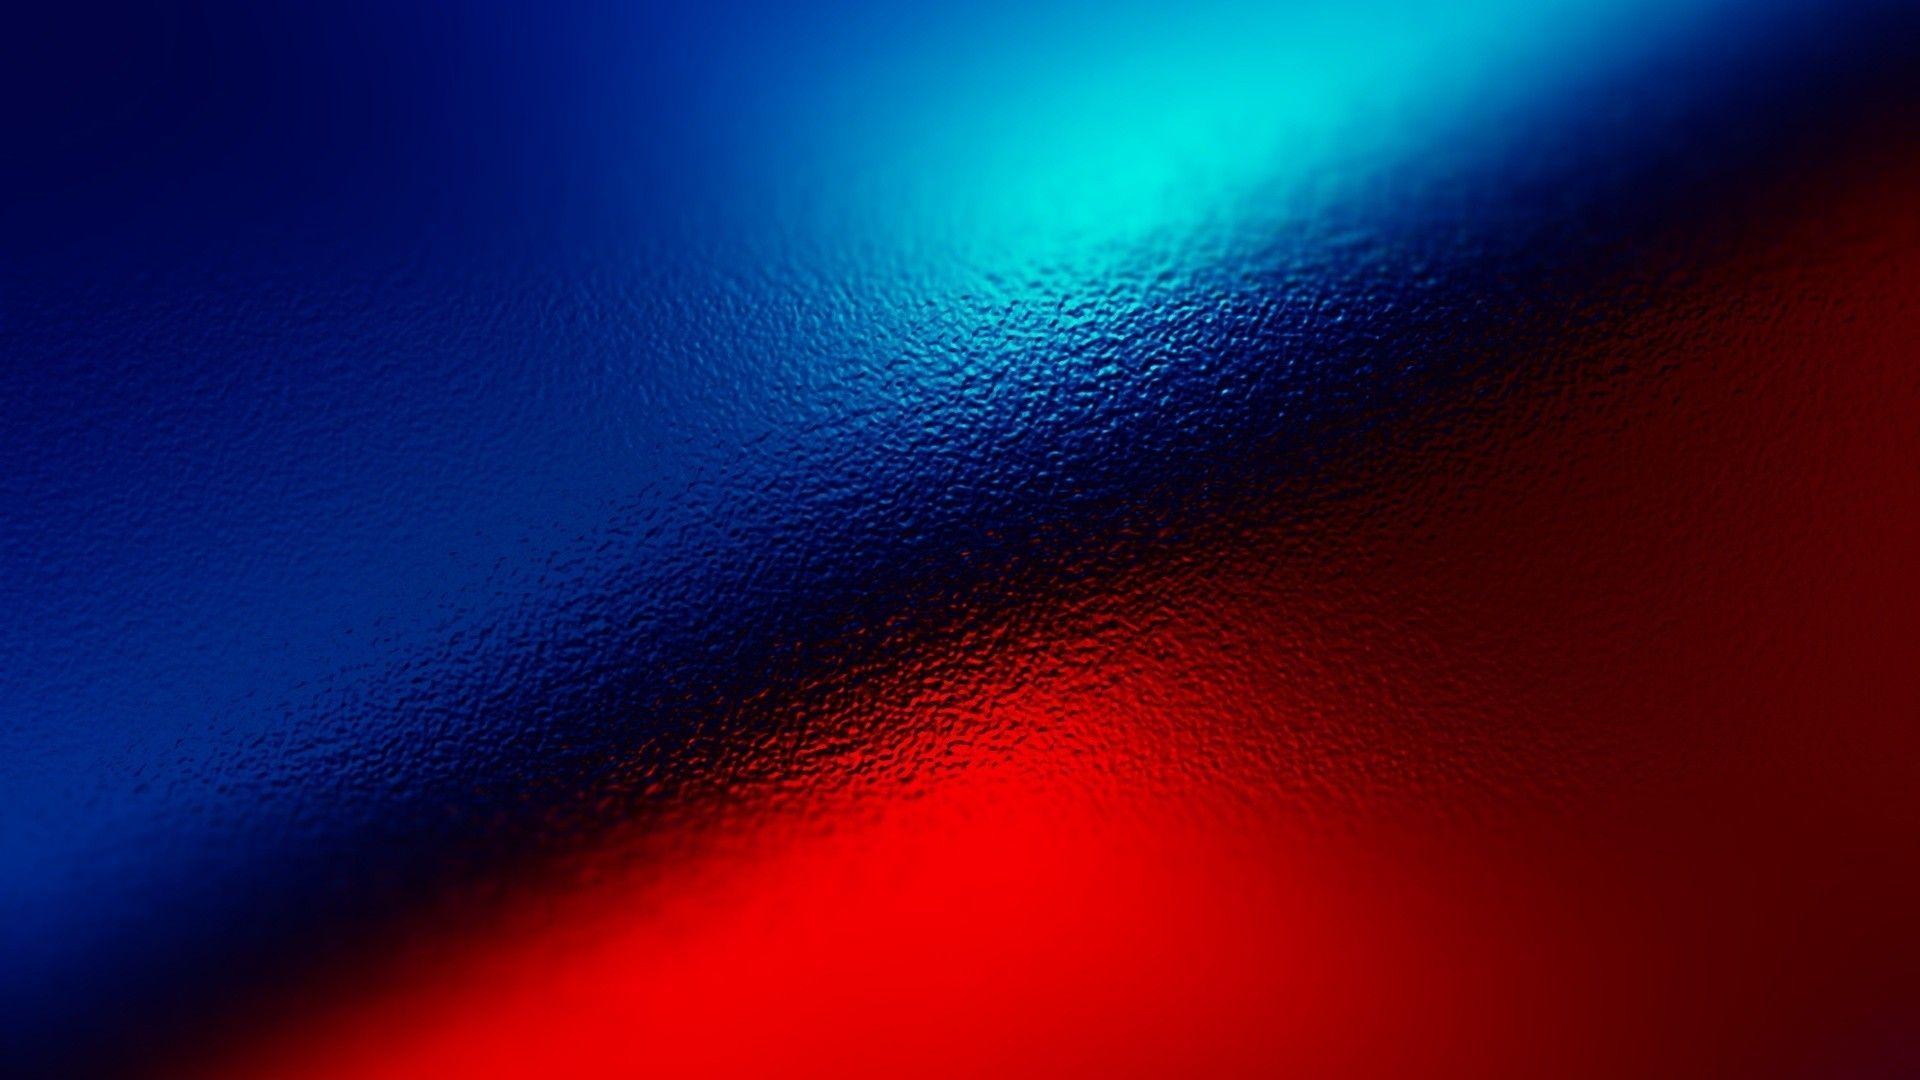 Get the best Background blue and red Images for your devices